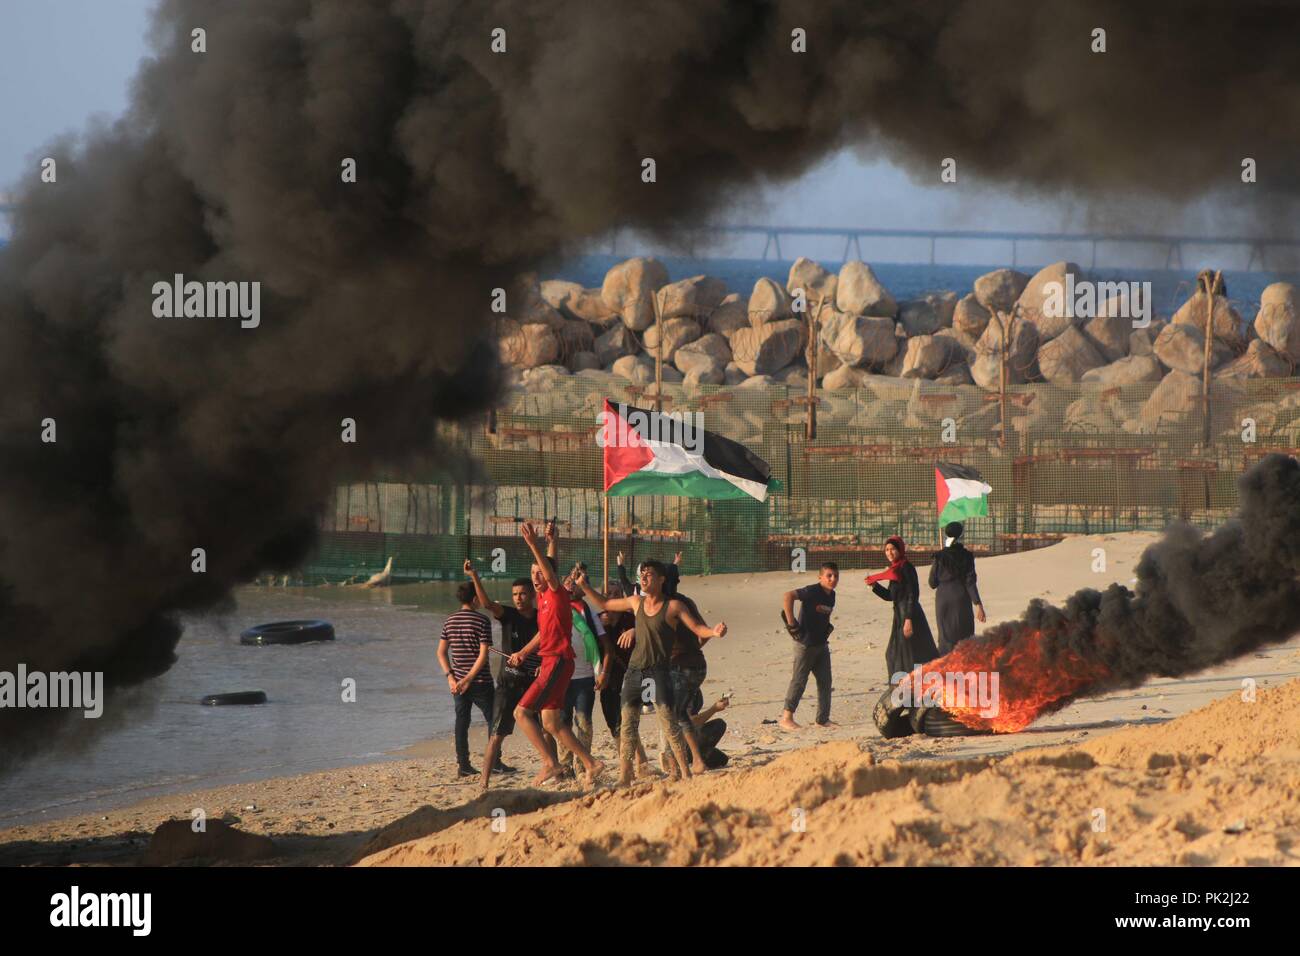 Beit Lahiya, The Gaza Strip, Palestine. 10th Sep, 2018. Palestinian protest northern the Gaza strip on the beach of Beit Lahiya, dozens of Gazans wounded after Israeli troops open fire on the protesters. Credit: Mahmoud Khattab/Quds Net News/ZUMA Wire/Alamy Live News Stock Photo